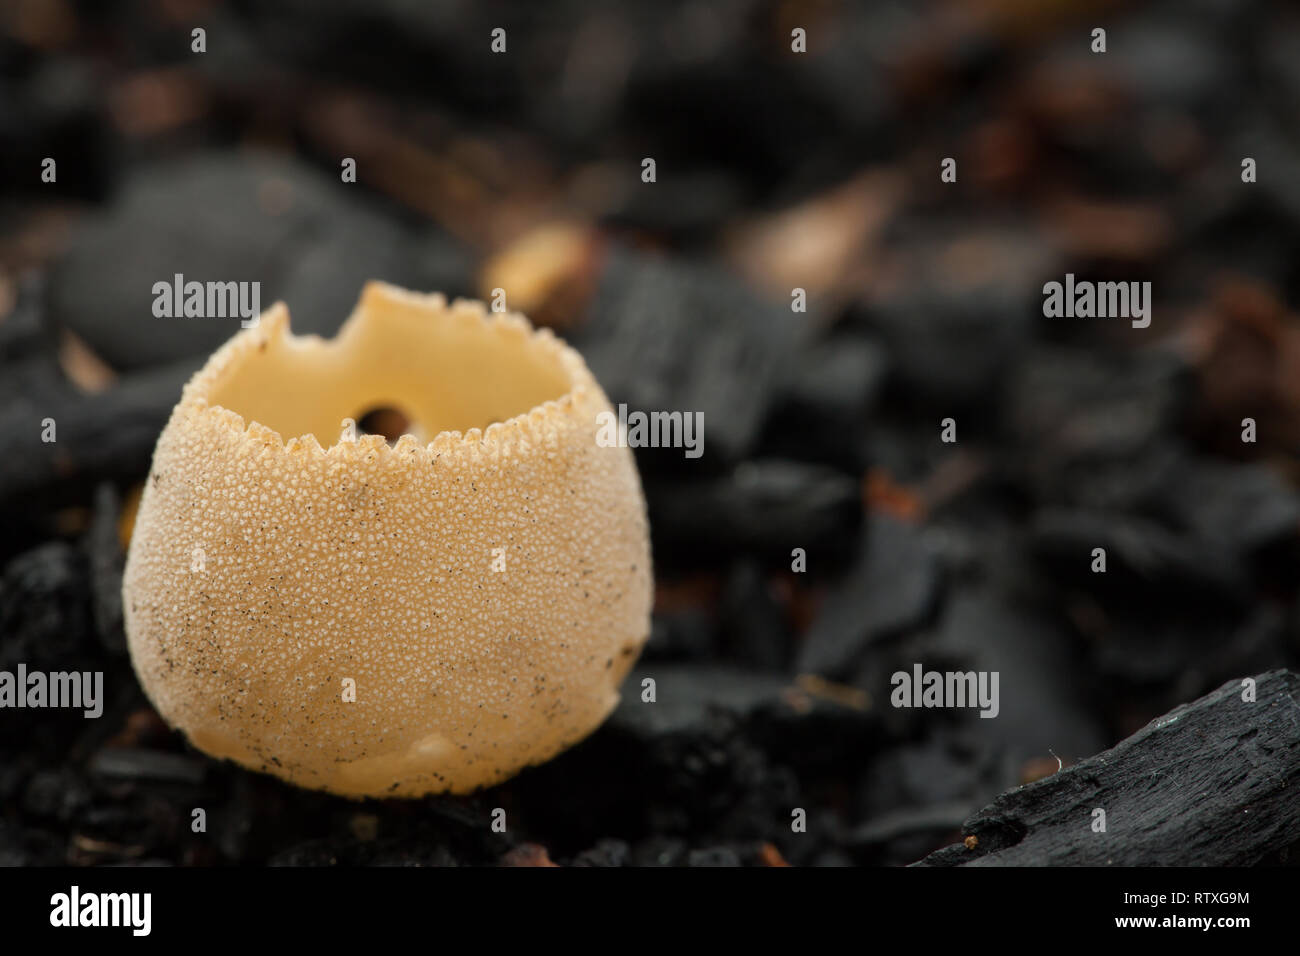 Toothed cup fungus on burned soil Stock Photo